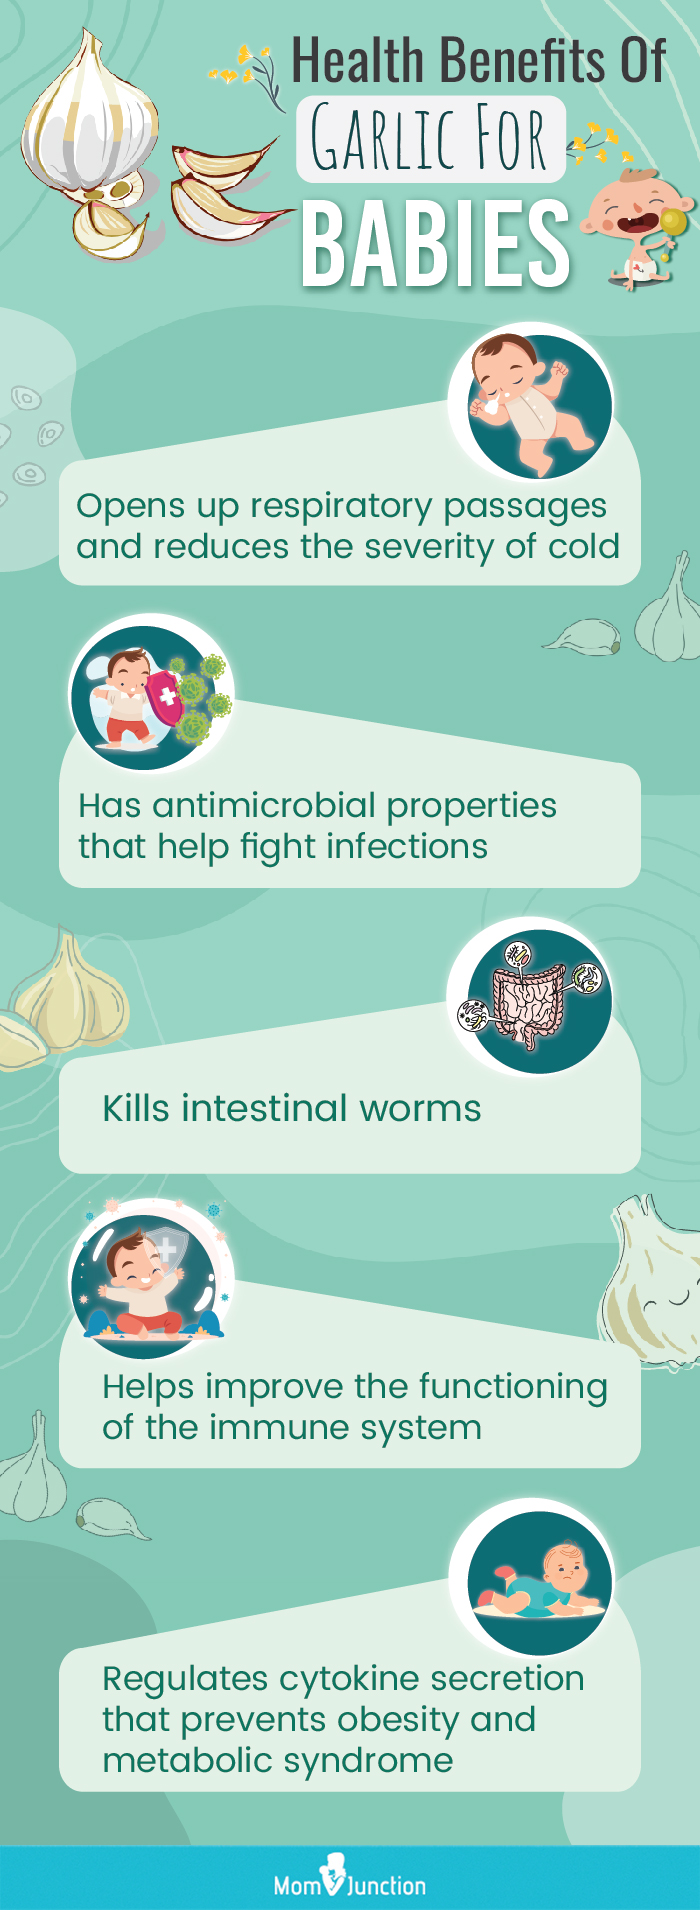 benefits of garlic for babies (infographic)